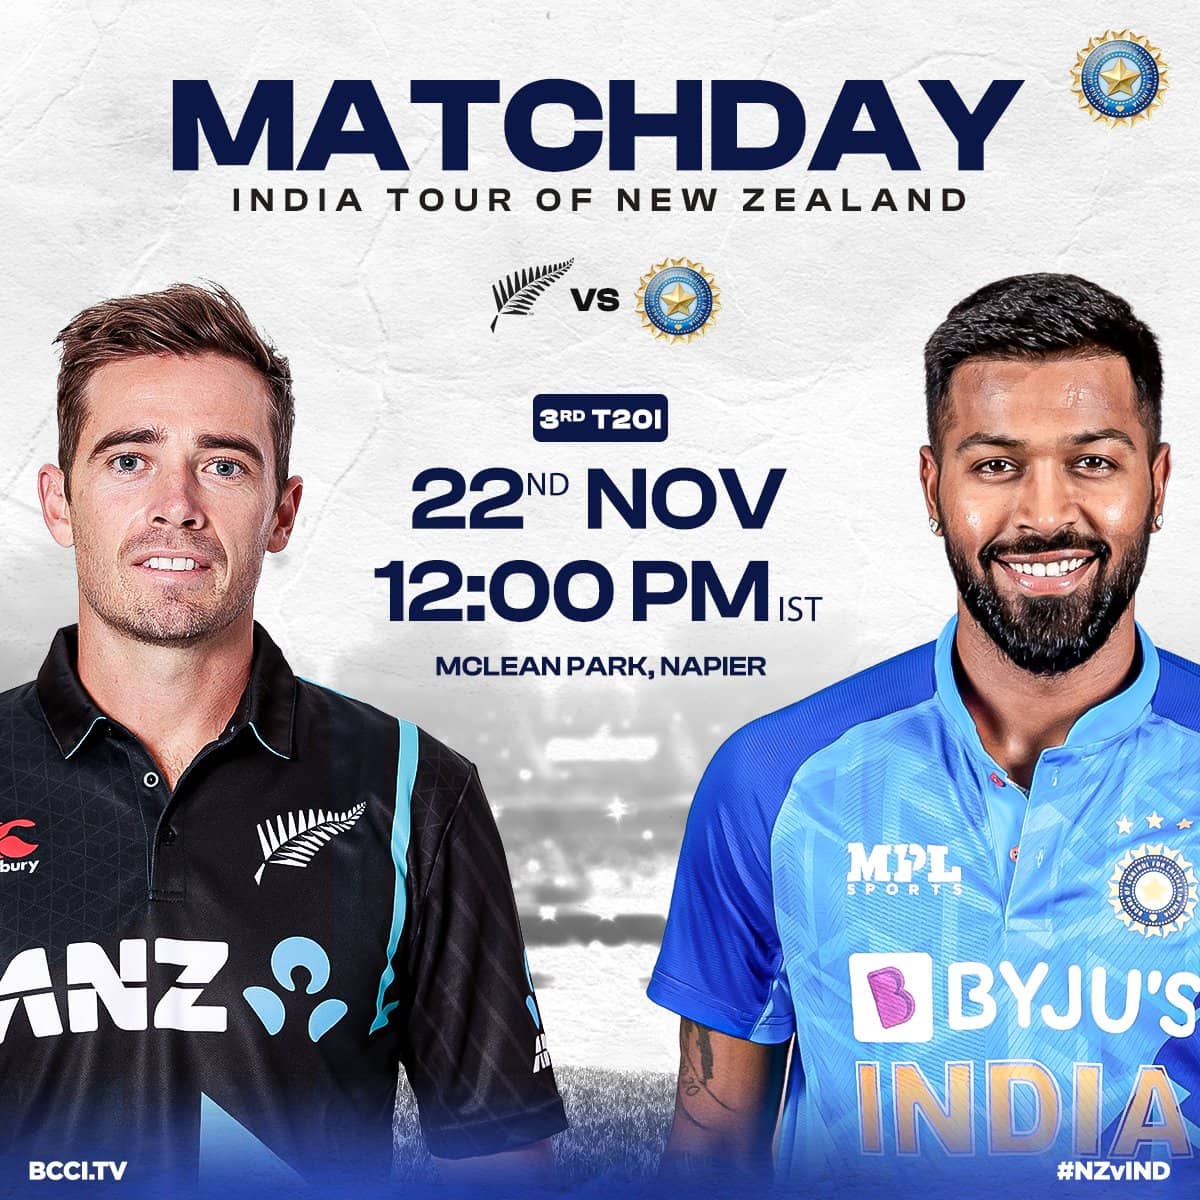 IND vs NZ 3rd T20I Series 2022 India win 3match series against New